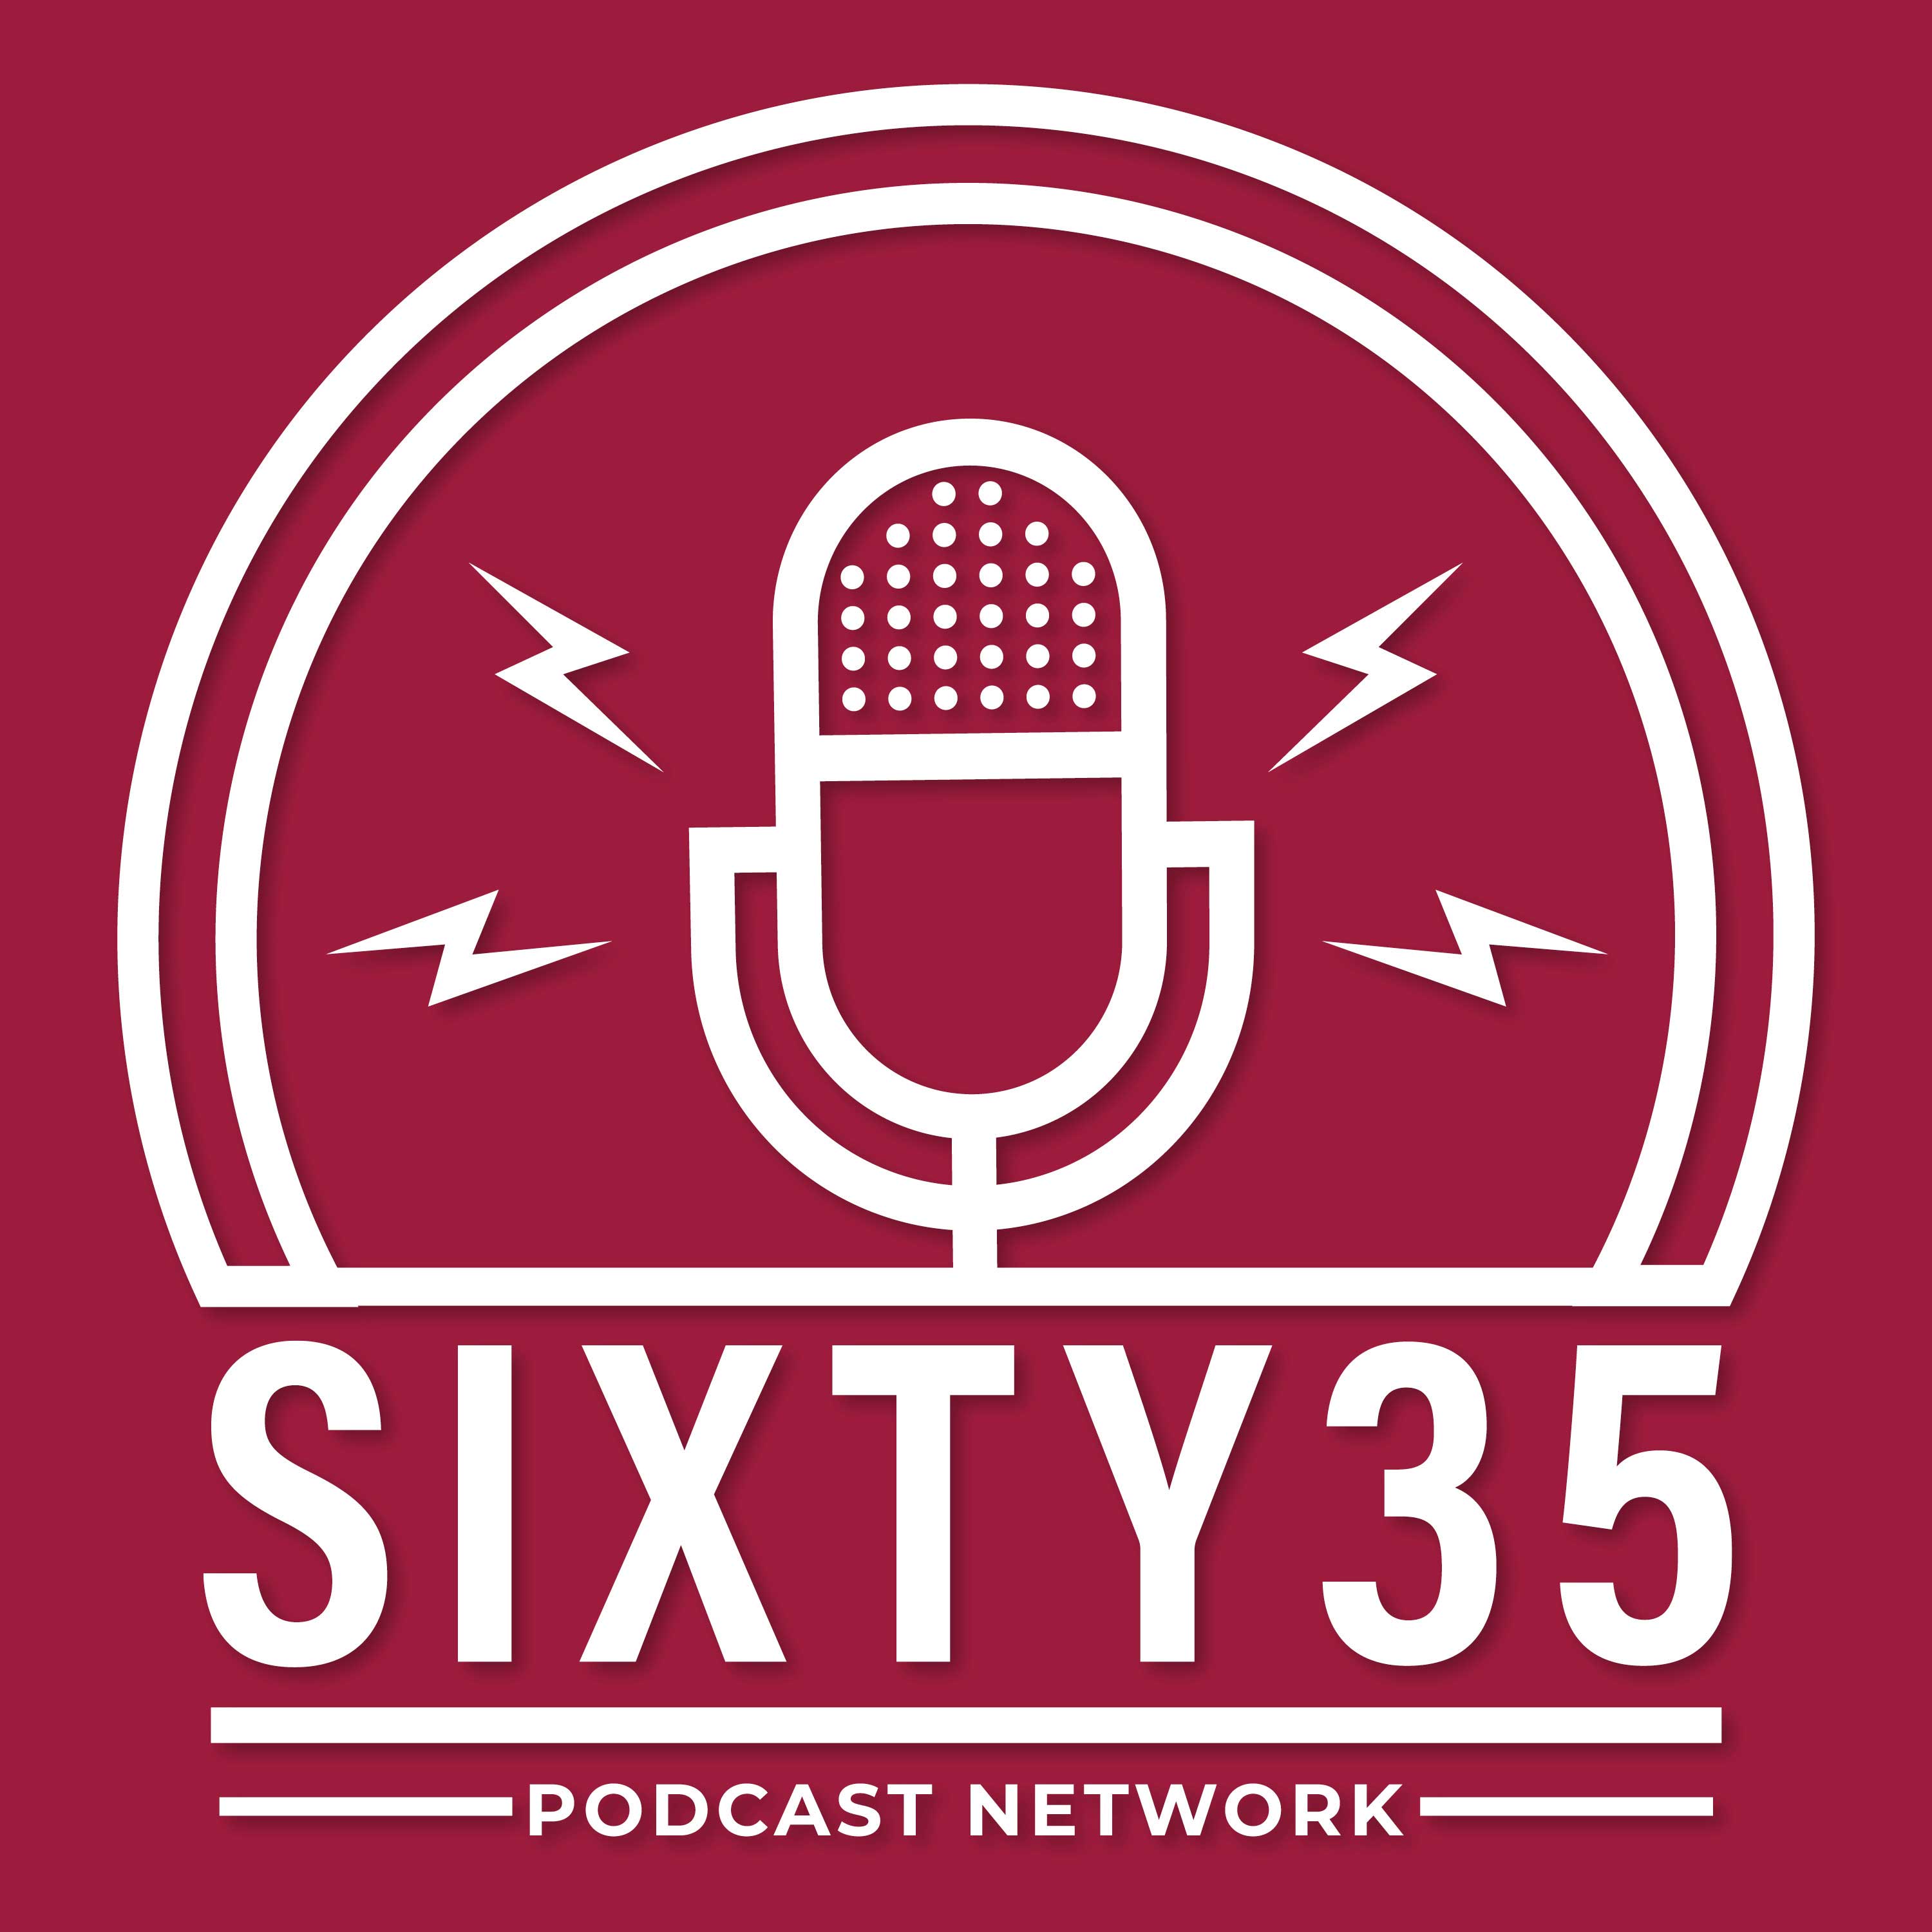 Artwork for Sixty35 Podcast Network